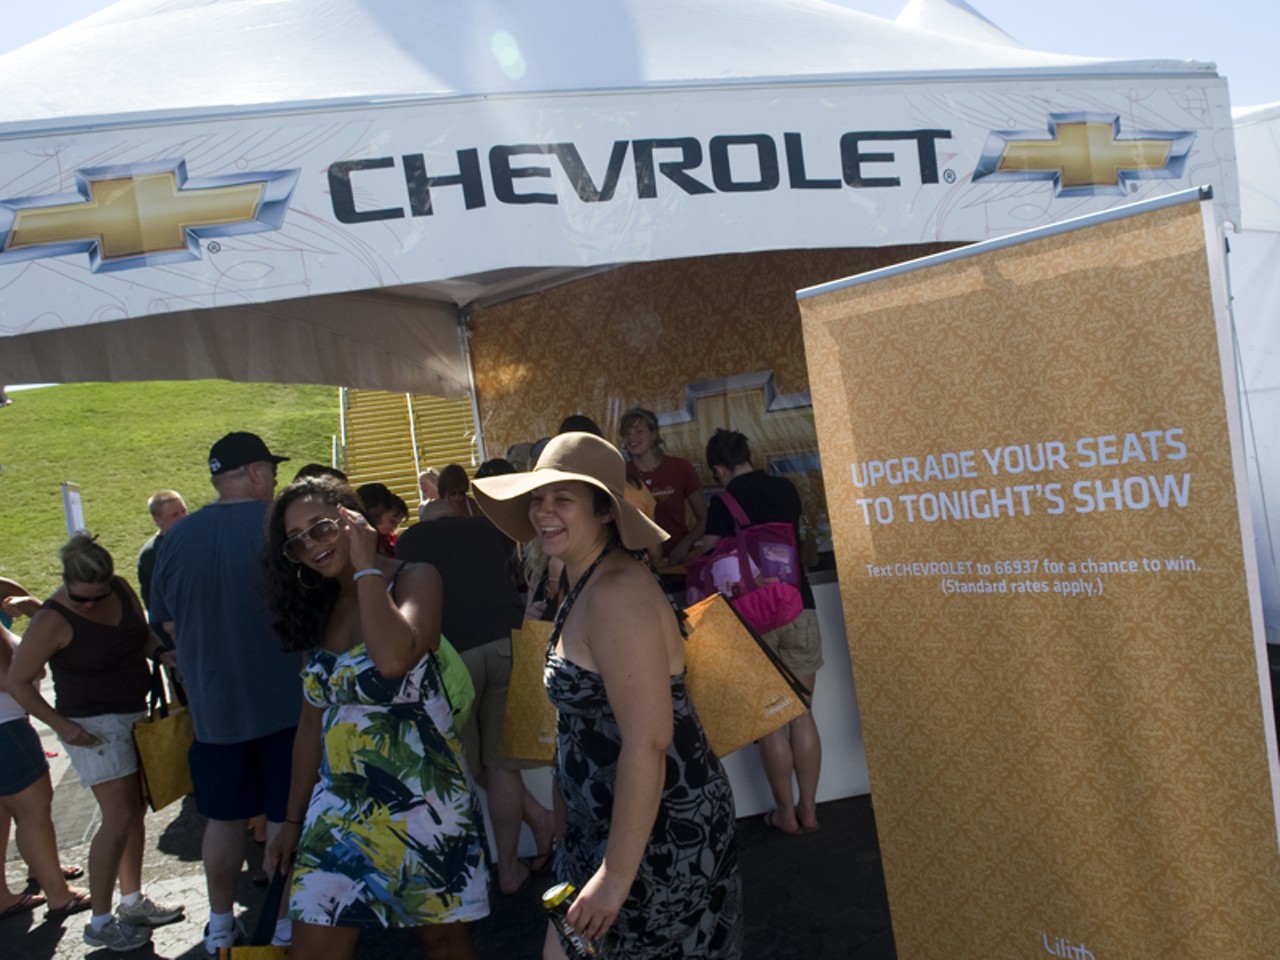 Fans could register at the Chevy tent to win a front-row ticket upgrade at Lilith Fair in St. Louis.